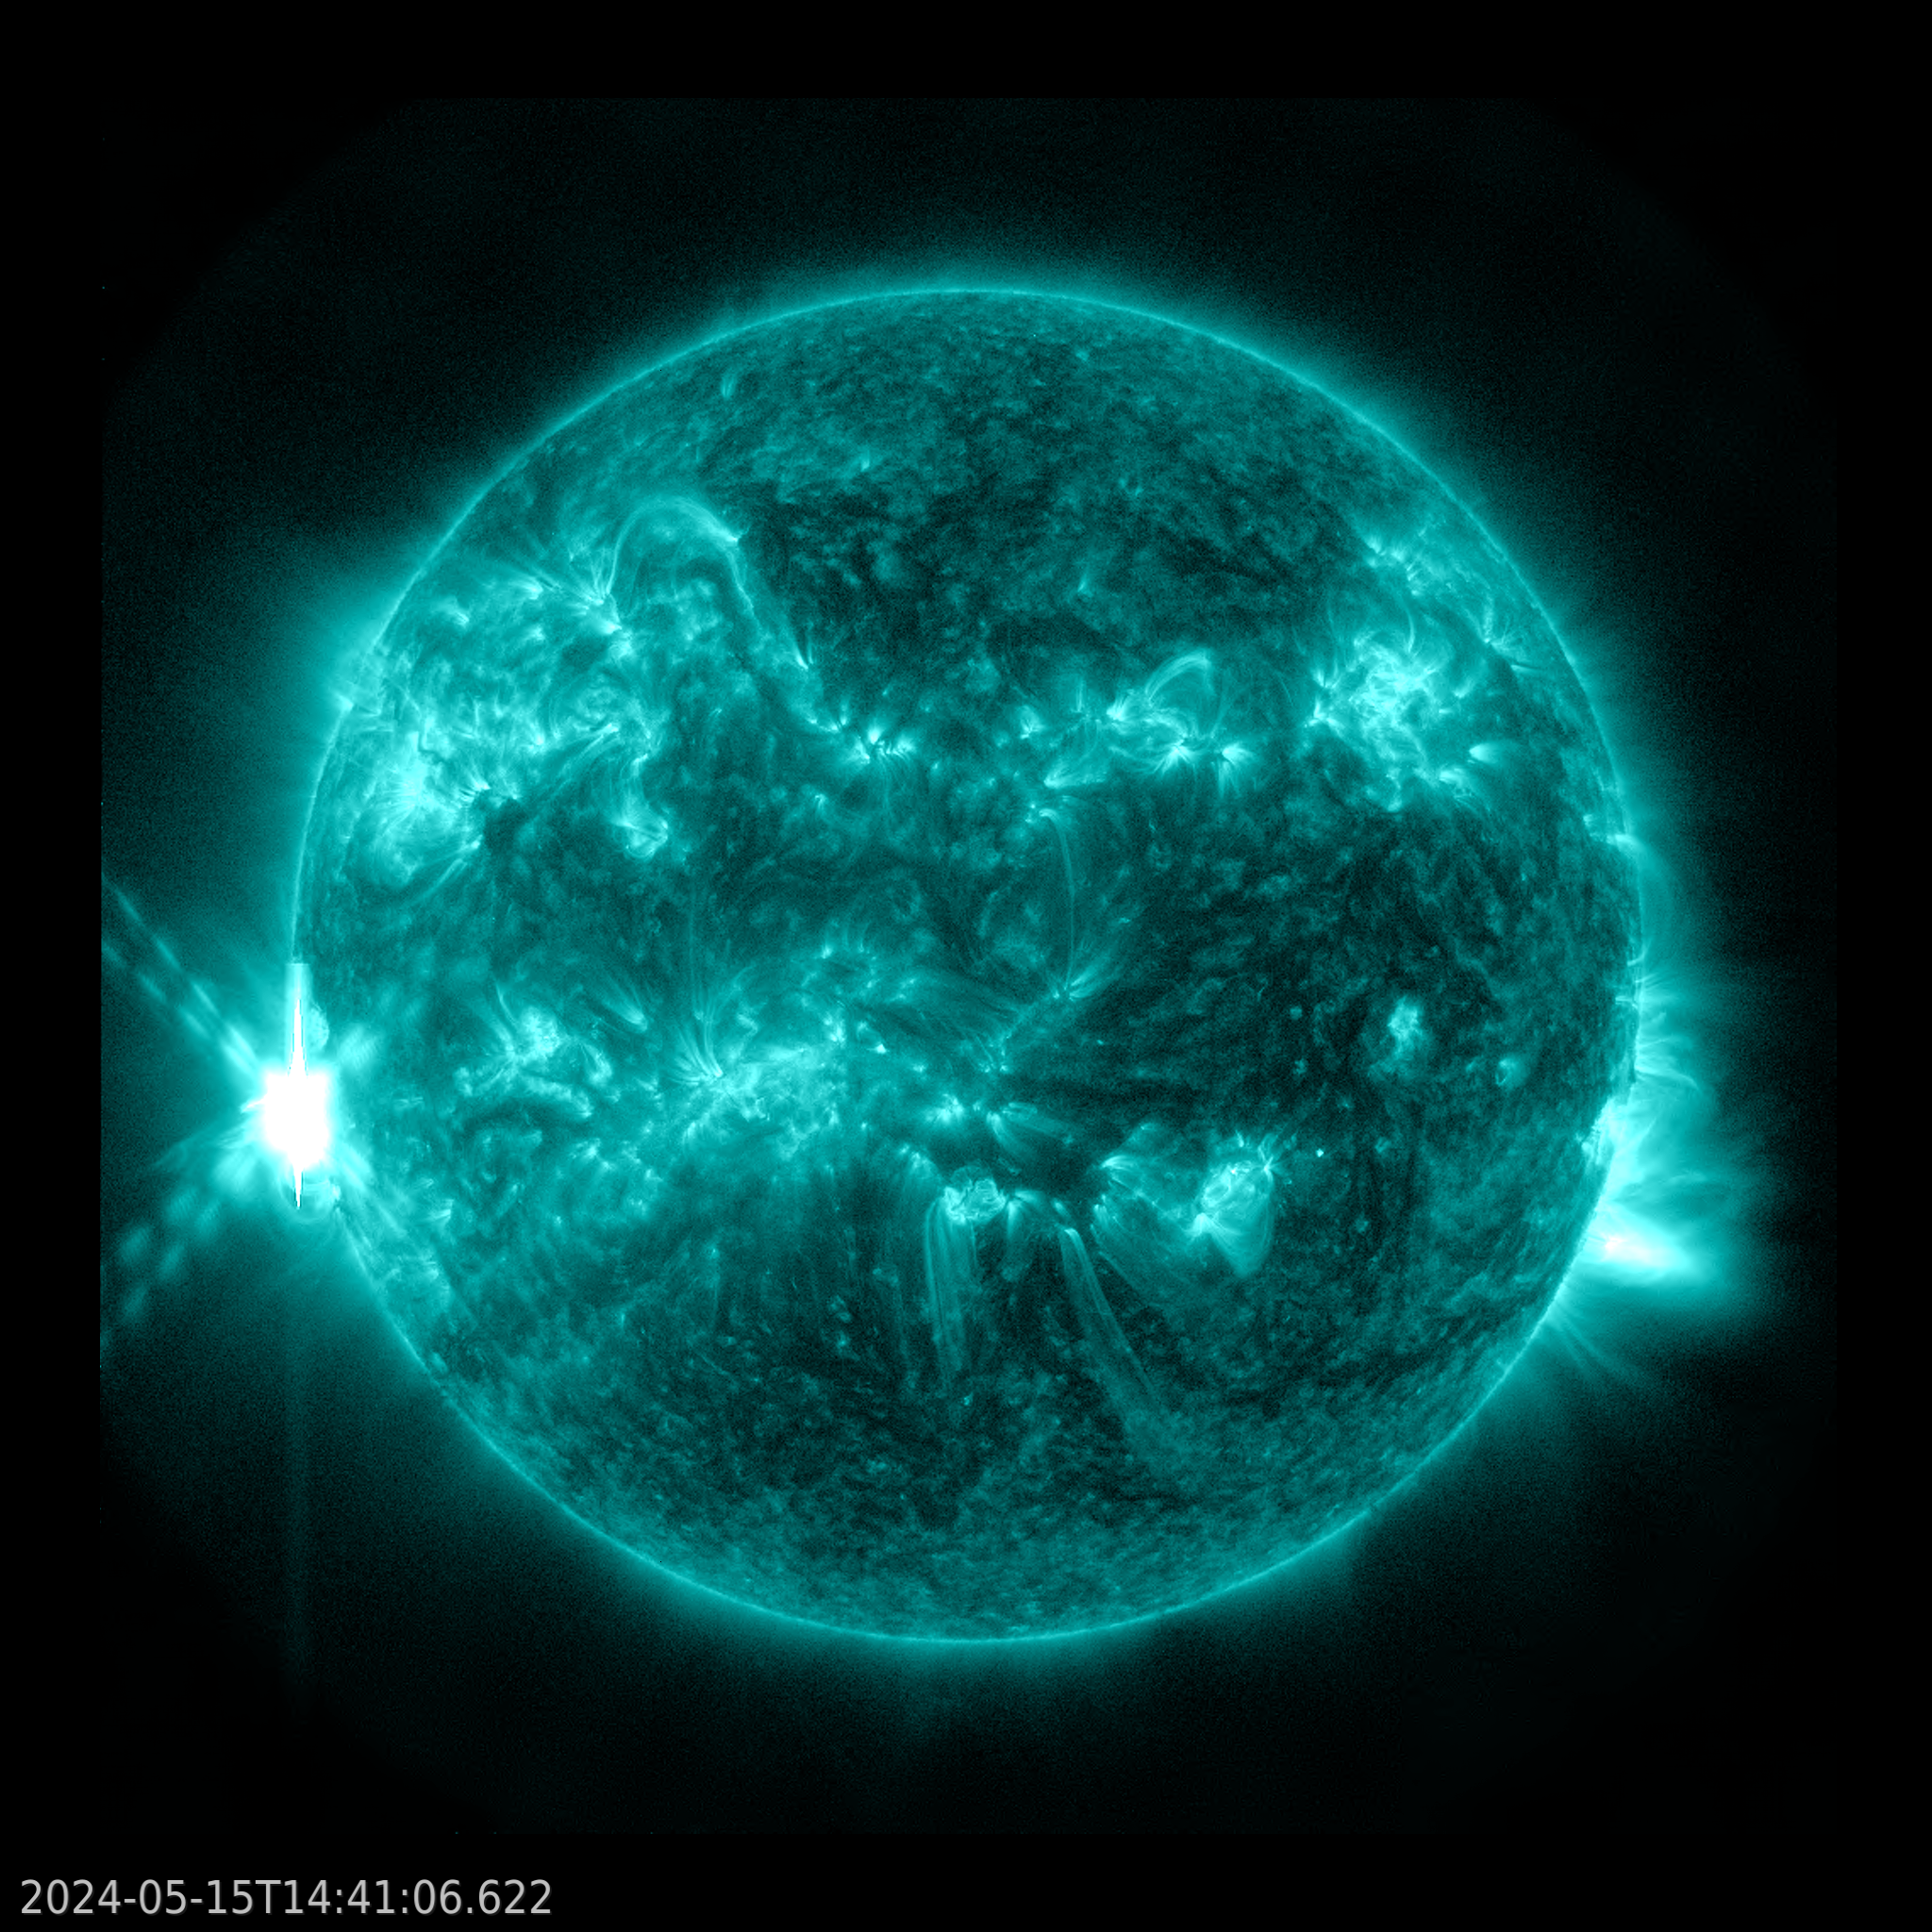 NASA’s Solar Dynamics Observatory captured this image of a solar flare – as seen in the bright flash on the right – on May 15, 2024. The image shows a subset of extreme ultraviolet light that highlights the extremely hot material in flares and which is colorized in teal.Credit: NASA/SDO